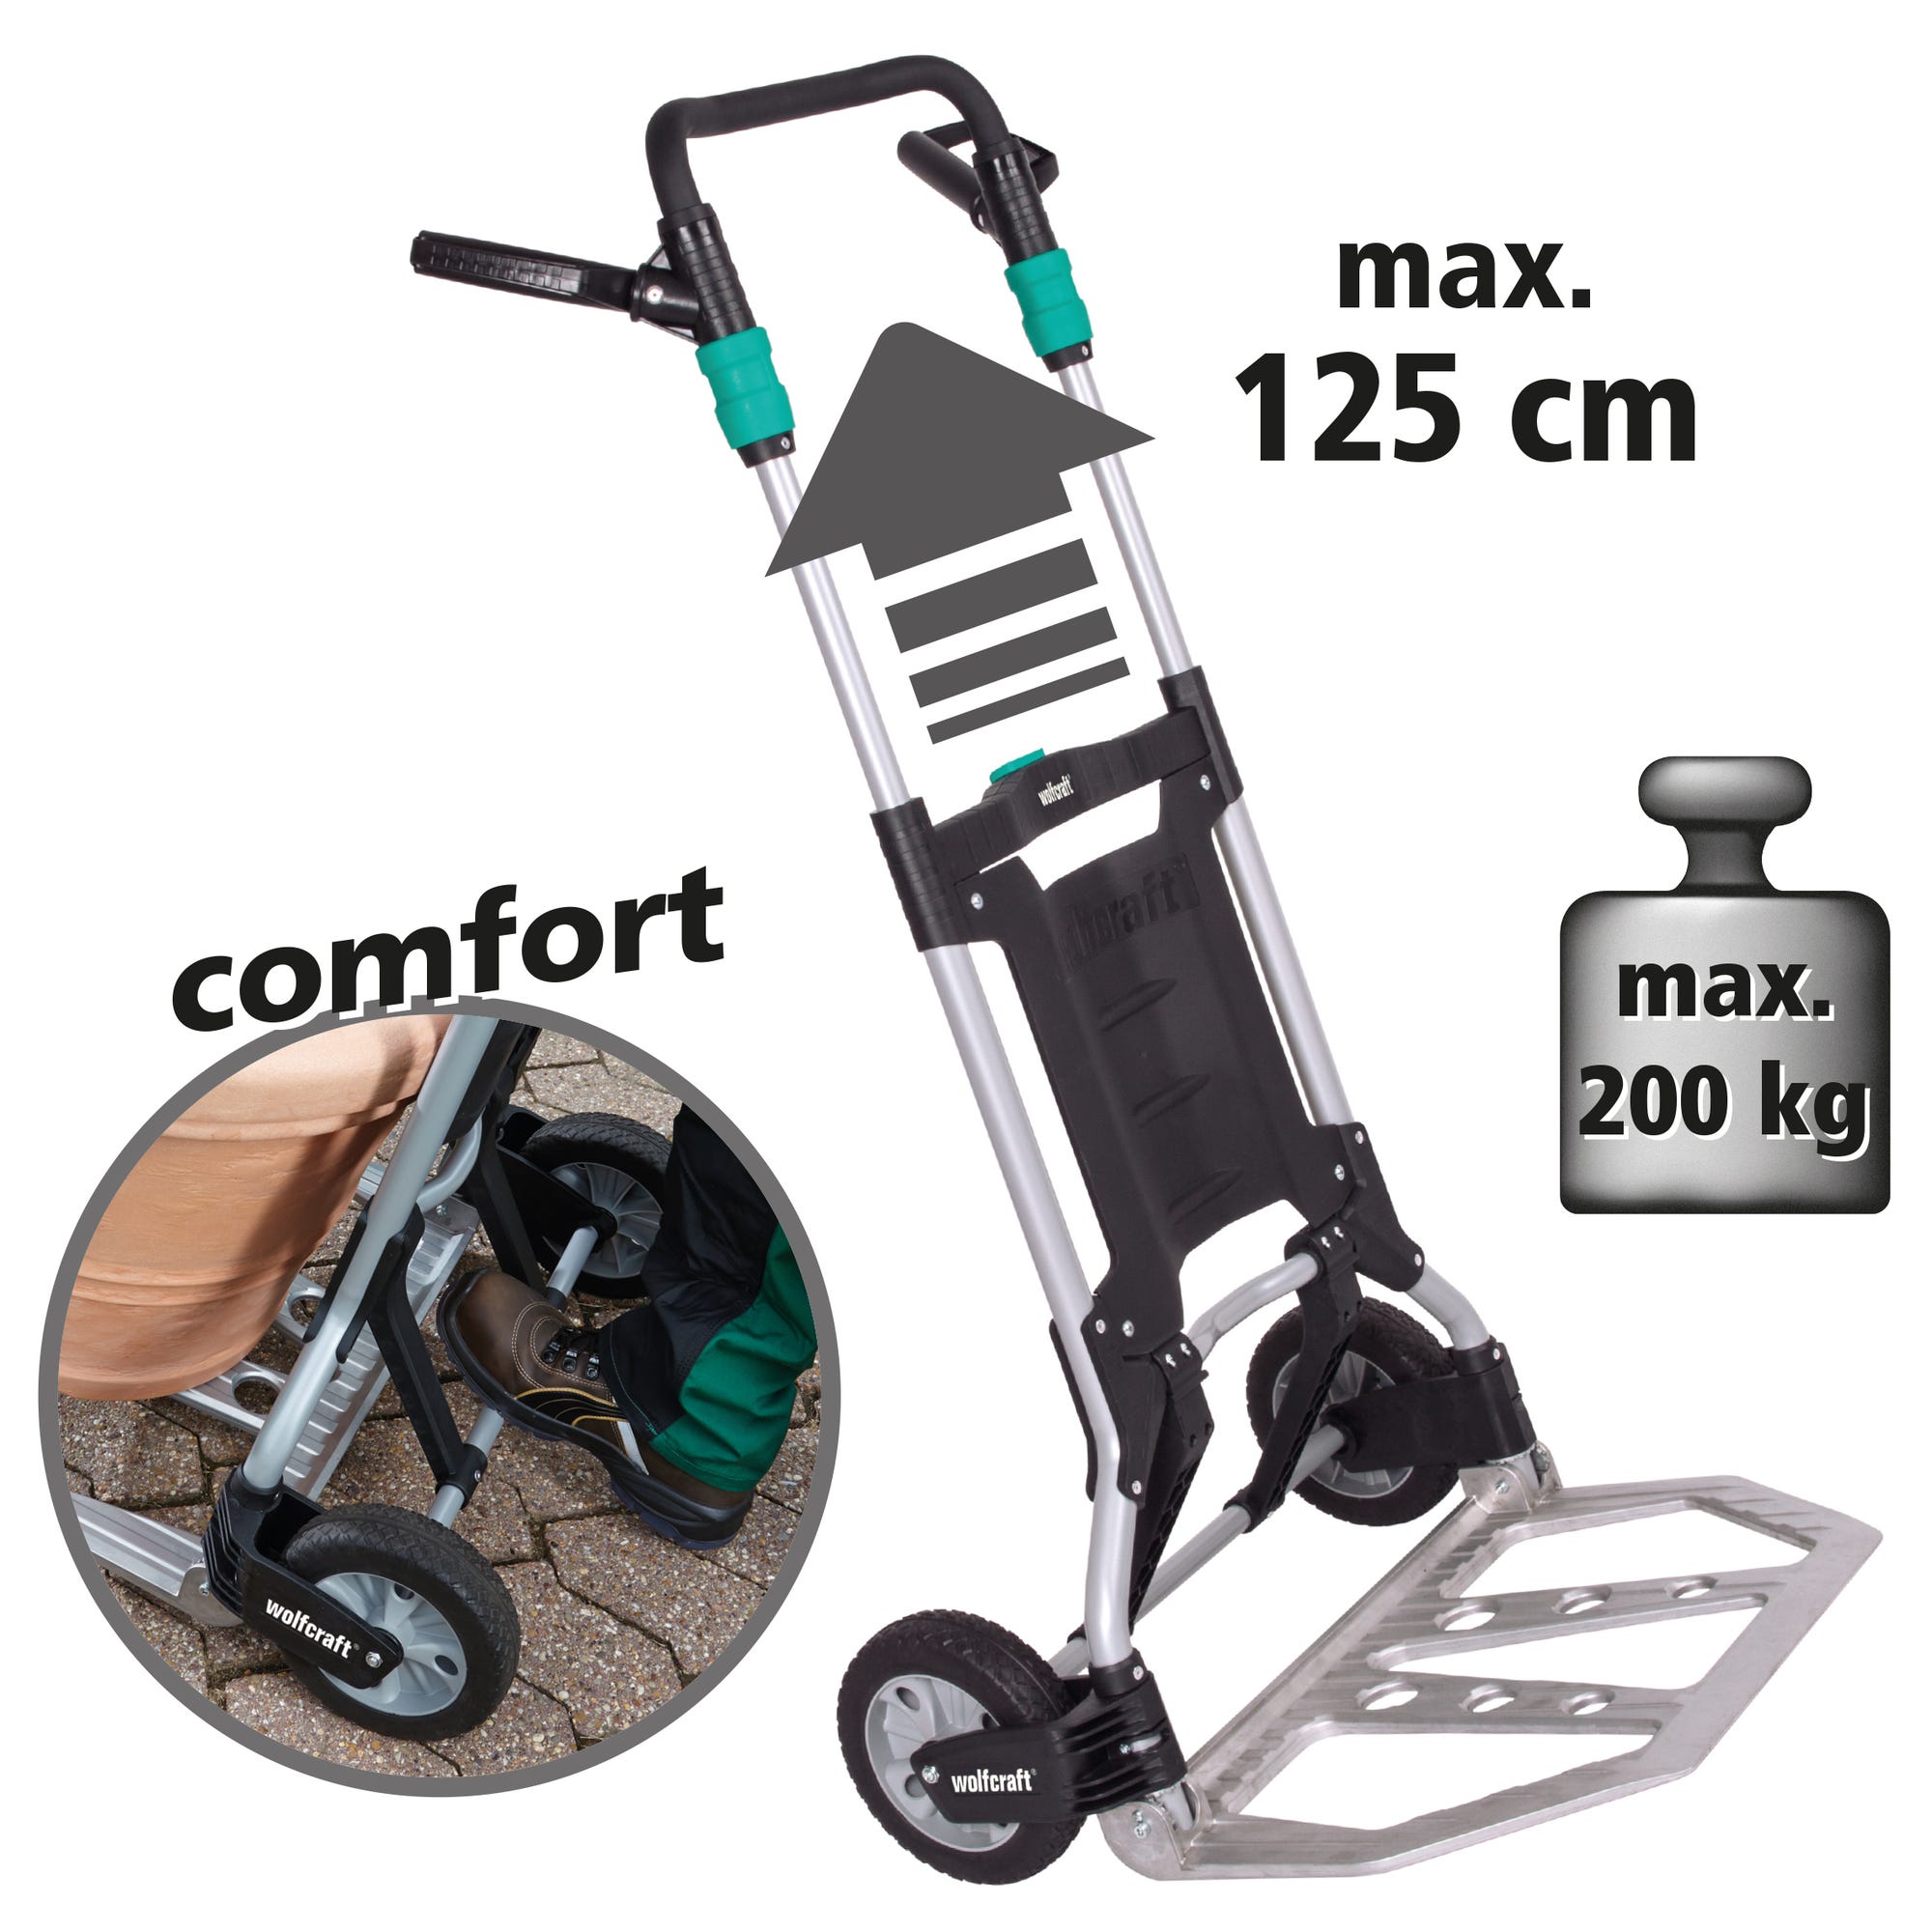 Diable Pliant Professionnel - Charge Max. 200 kg - TS 1500 - wolfcraft 5525000 2